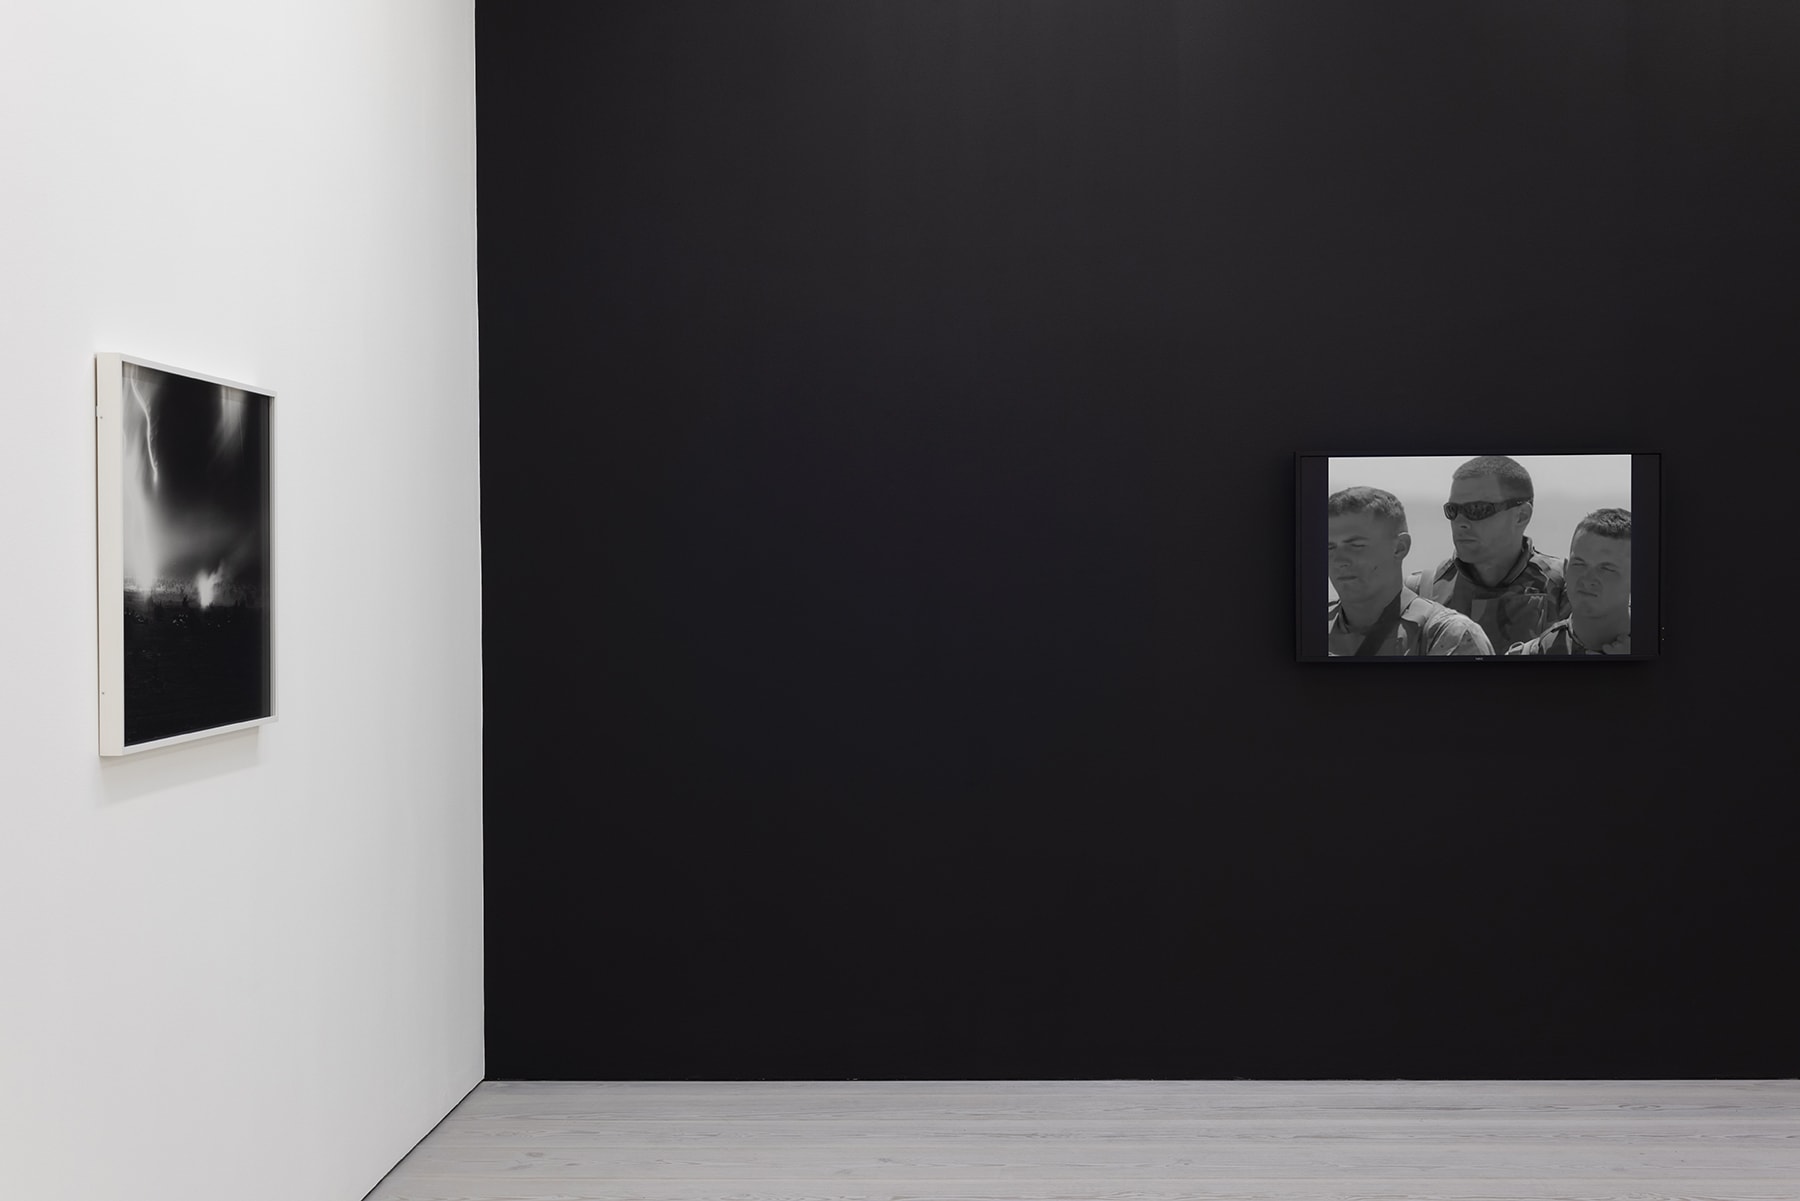 installation view of black and white photographs of war simulation by An-My Le